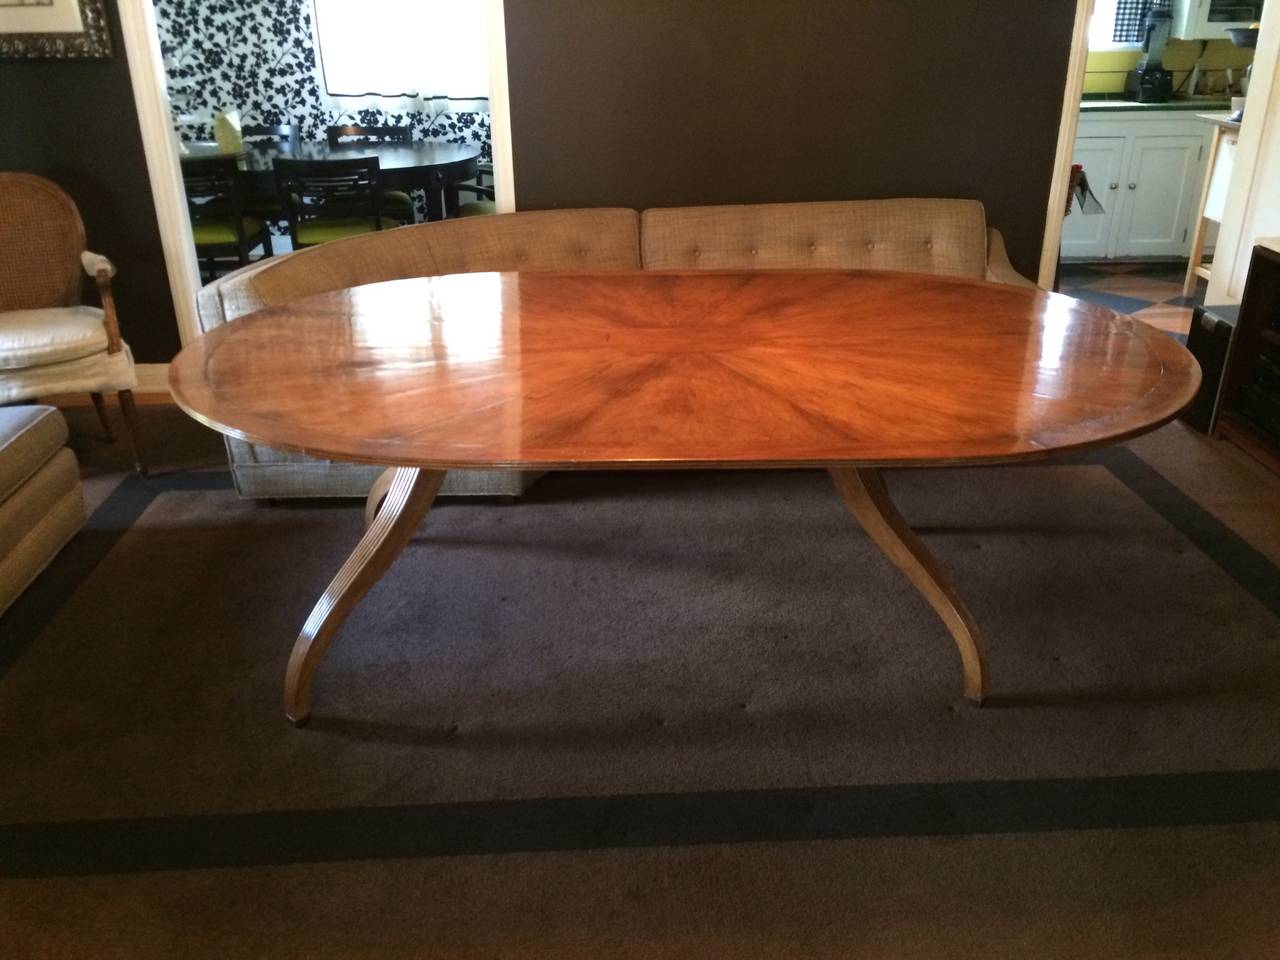 Beautifully made dining room table by Rose Tarlow Melrose House - sunburst pattern top and custom fitting top to base.  - seats 8 comfortably